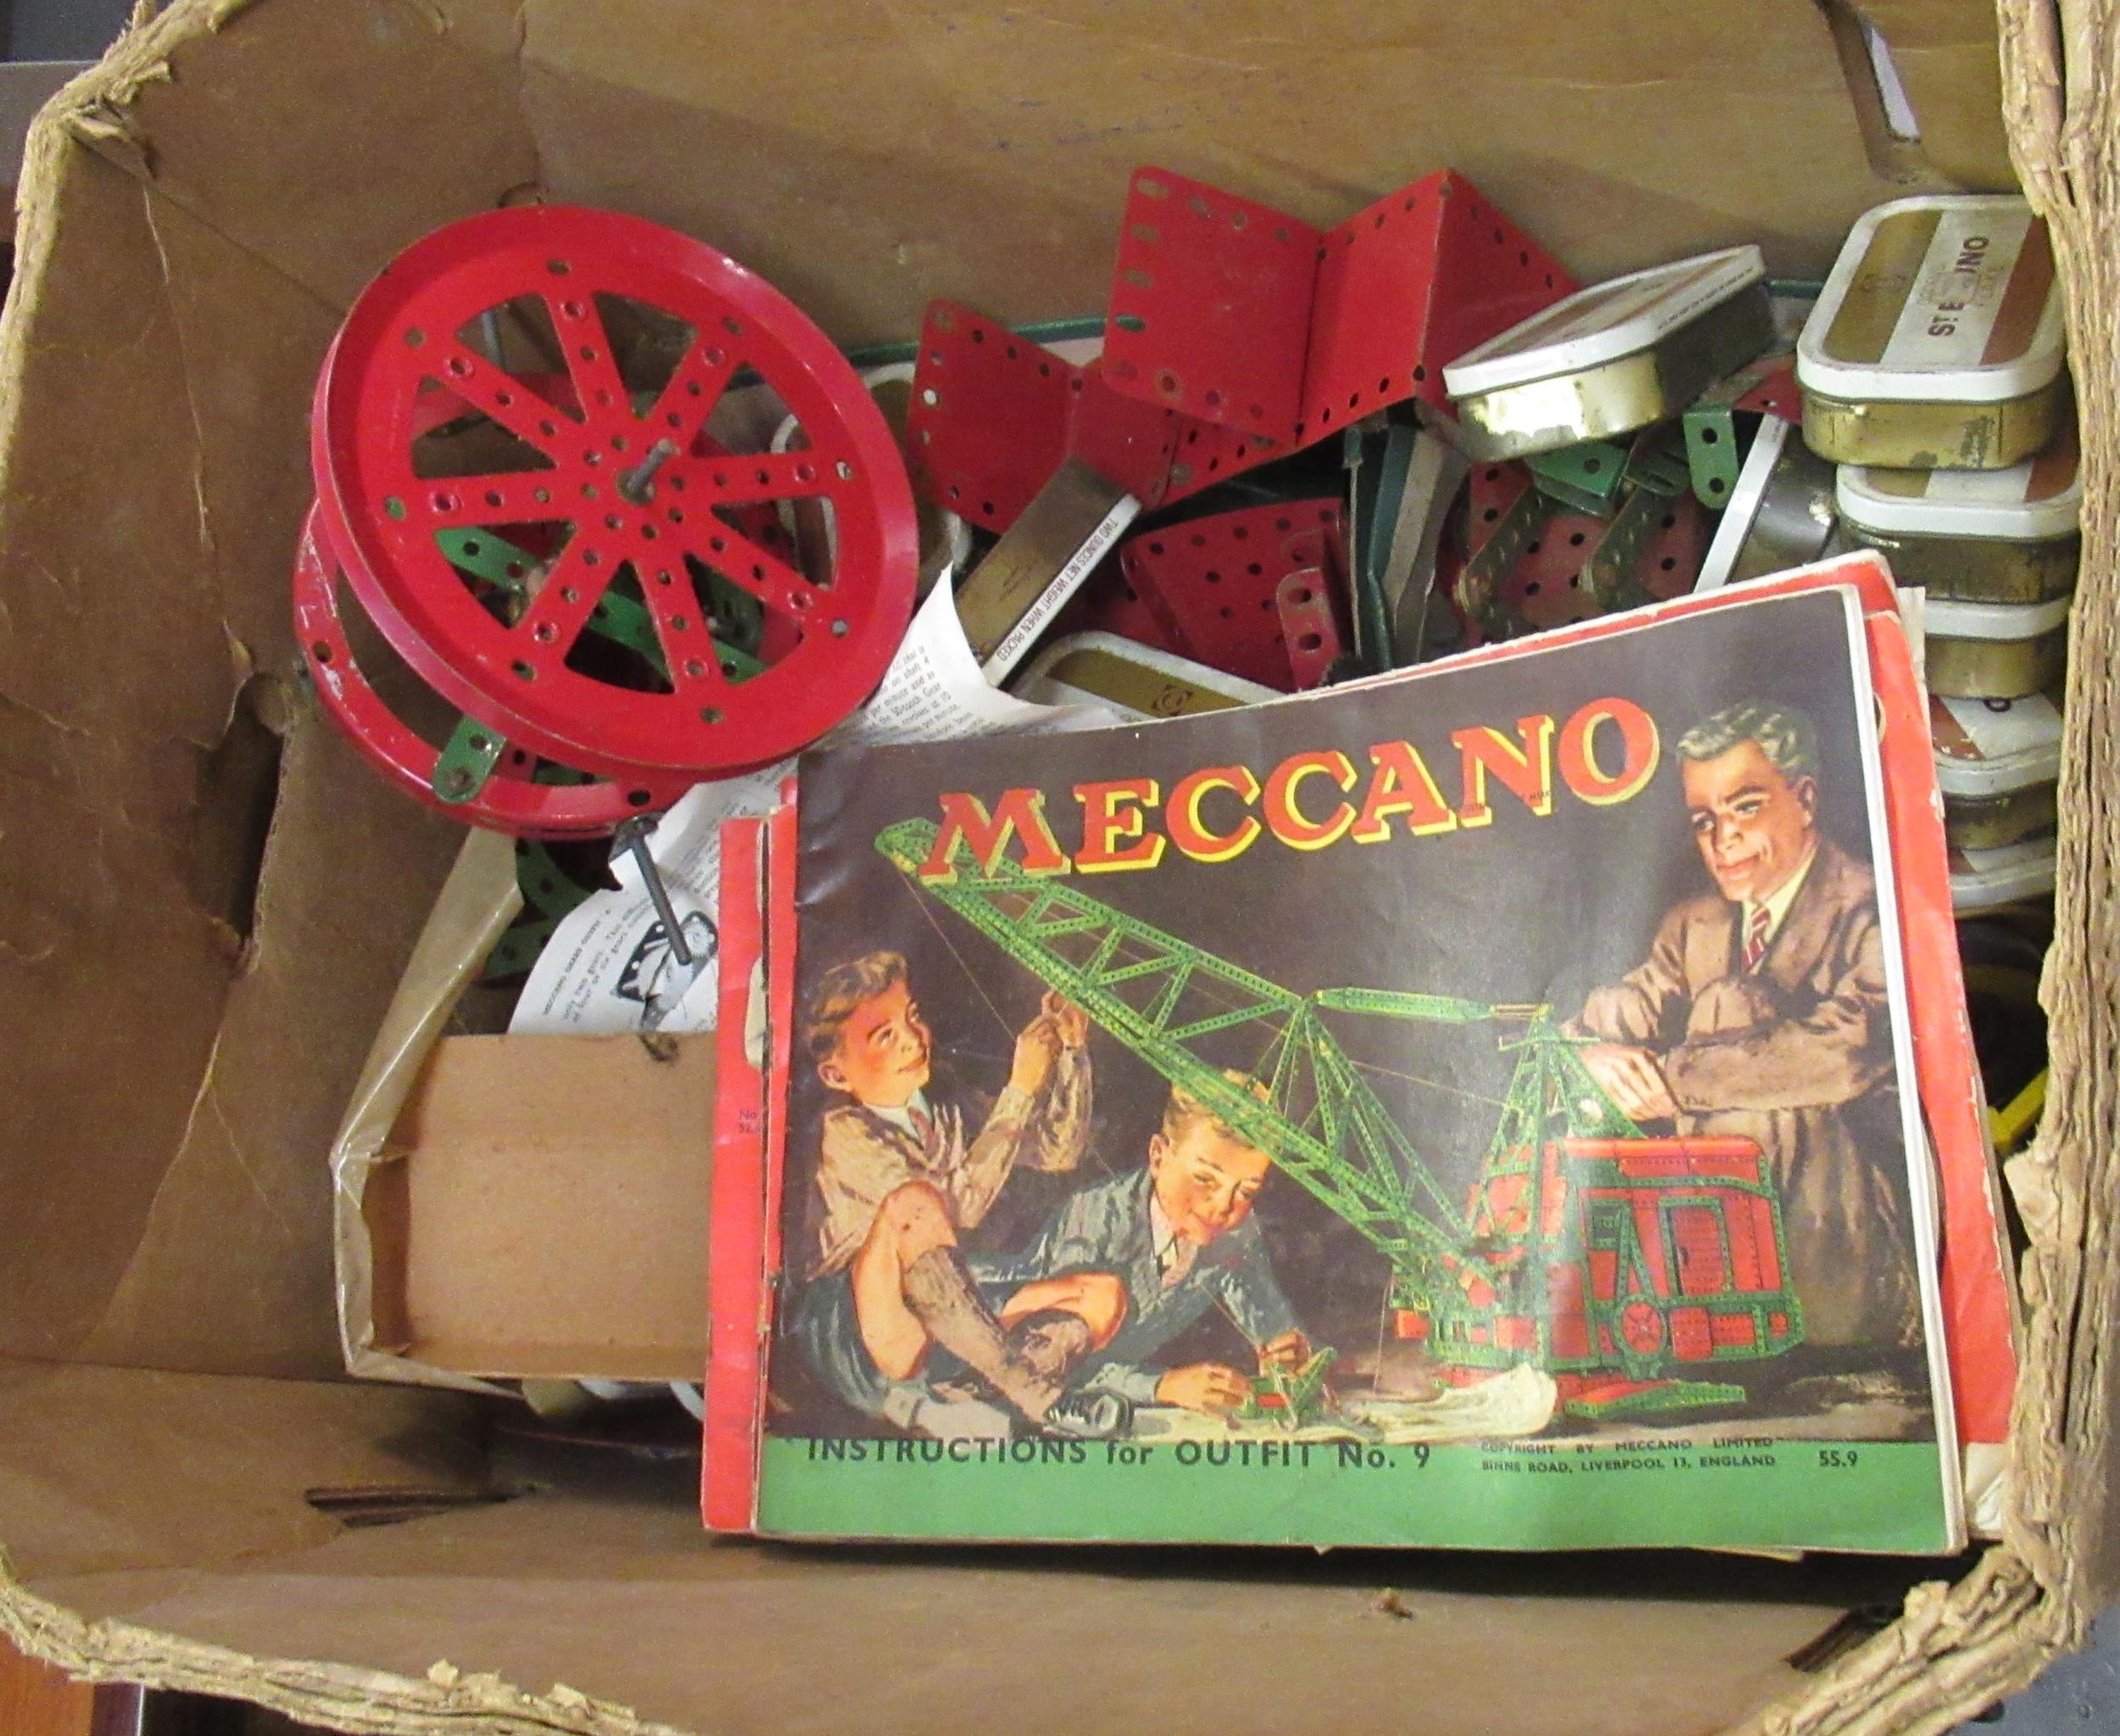 Quantity of various Meccano and Meccano instruction booklets